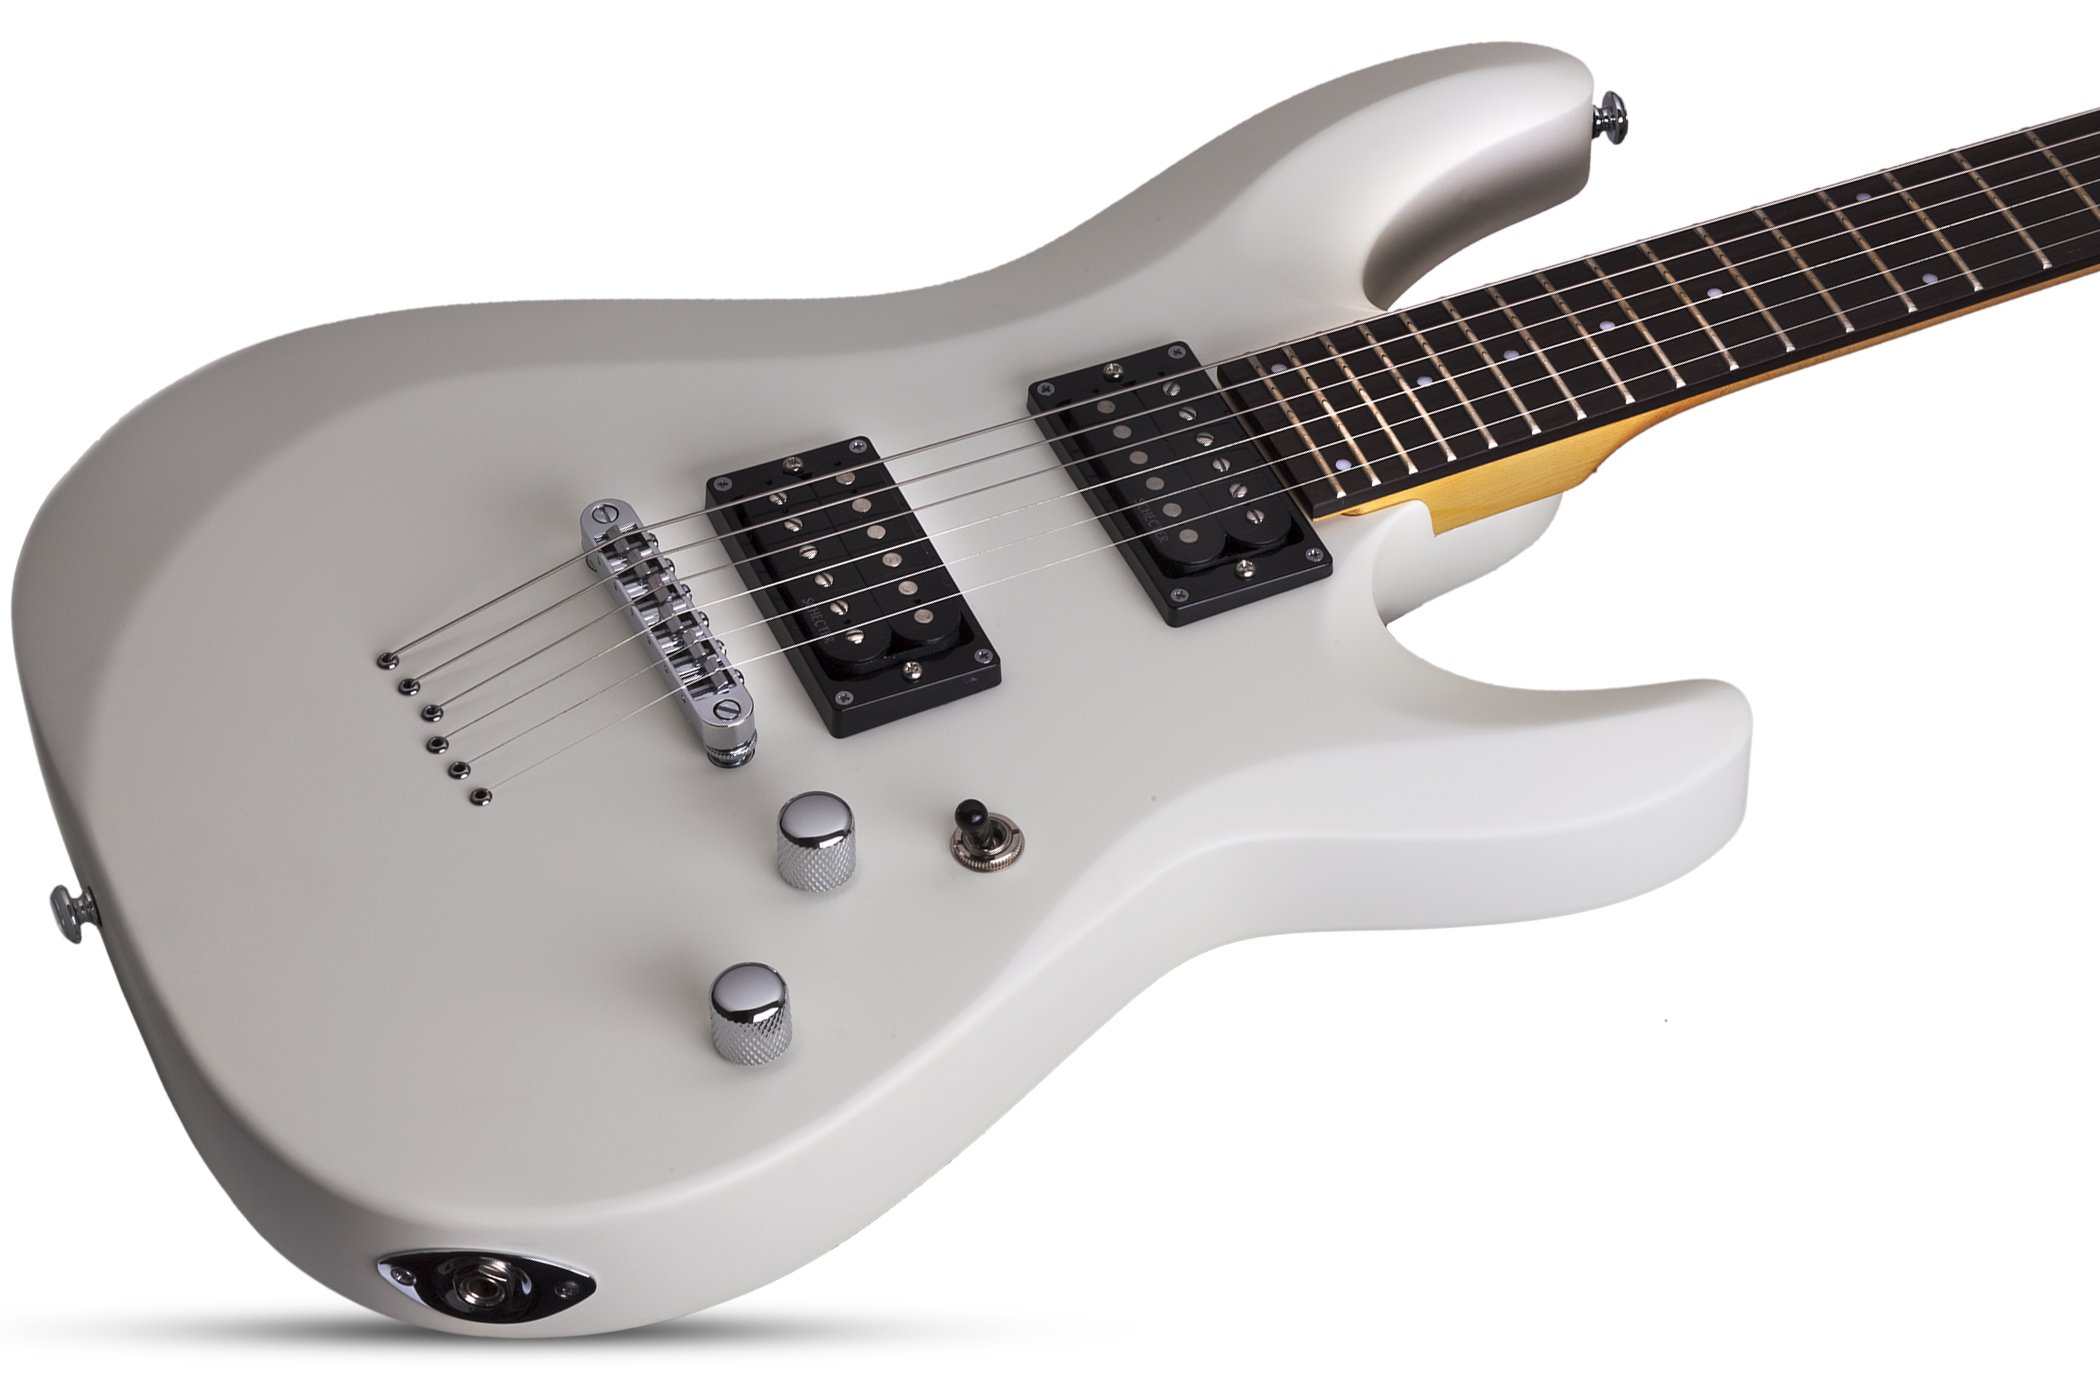 Schecter C-6 Deluxe 2h Ht Rw - Satin White - Double cut electric guitar - Variation 1